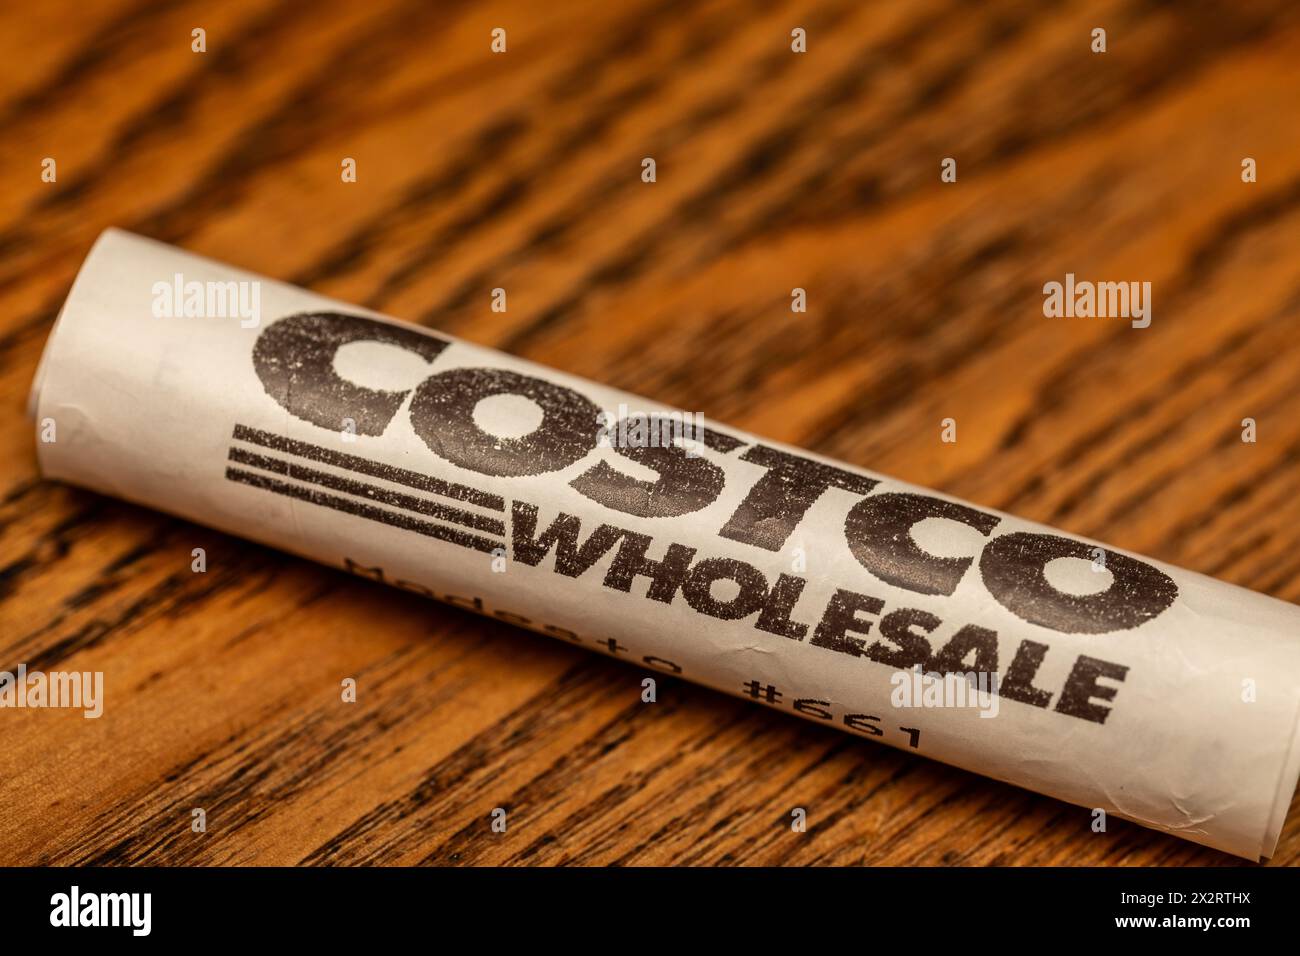 A rolled up Costco Wholesale receipt with logo Stock Photo